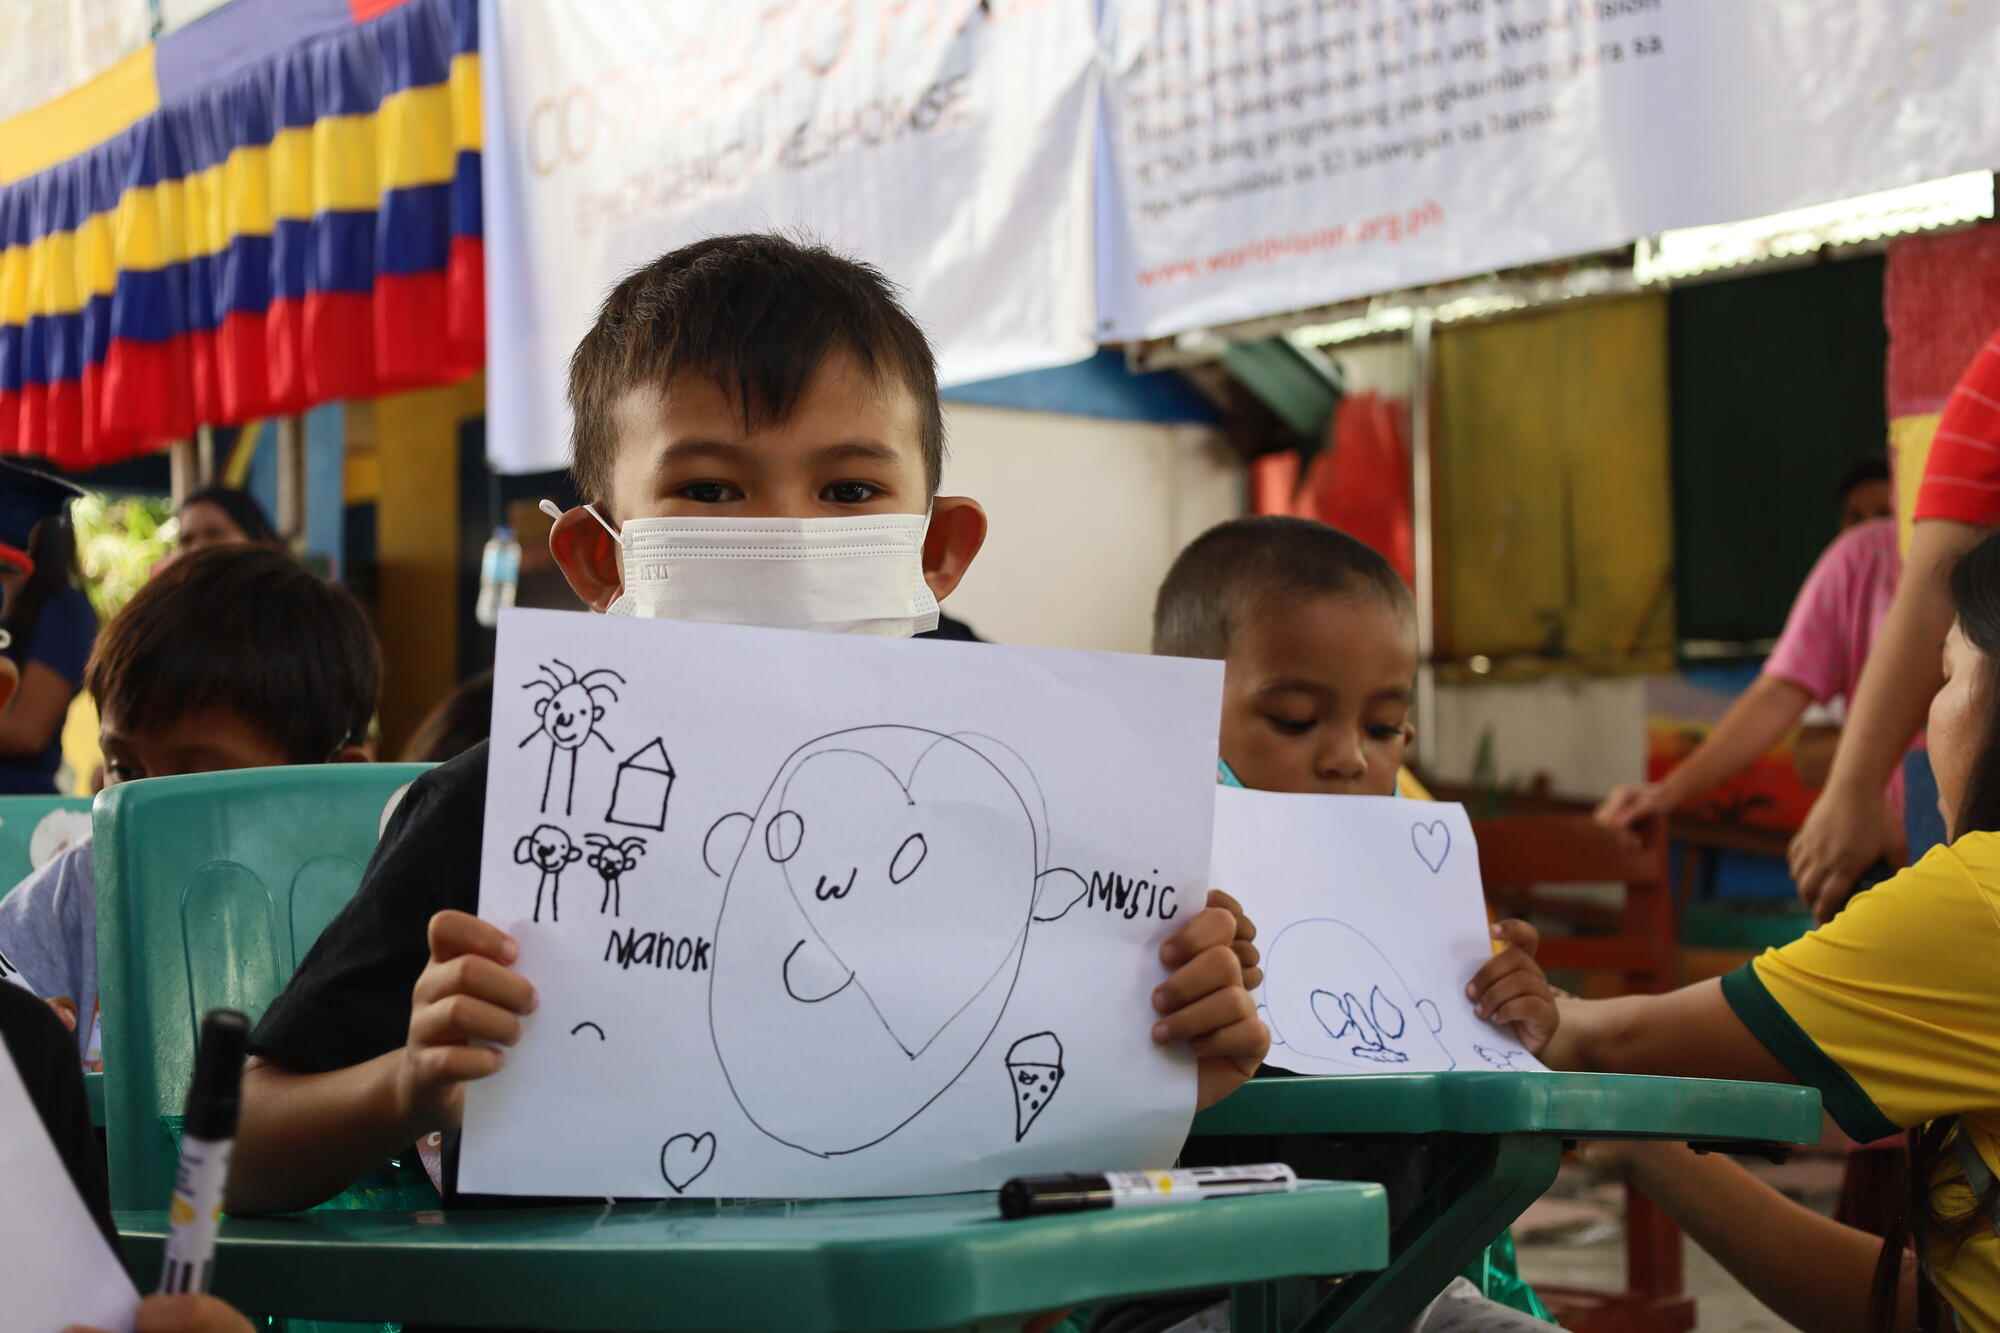 A catastrophic fire broke in Barangay Poblacion 7, Cotabato City on 5 July 2023, resulting in the destruction of houses and leaving hundreds of families homeless.  Some children who survived the fire show their drawings as part of a Psychological First Aid (PFA) program by World Vision. World Vision through Raw Hope has provided hygiene and educational kits as well as 10-day psychological support through Child-Friendly Spaces (CFS) . Families also received sets of kitchenware utensils, consisting of a cooking pot, frying pan, stainless steel bowls, tablespoons, forks, serving spoons, plates and mugs.